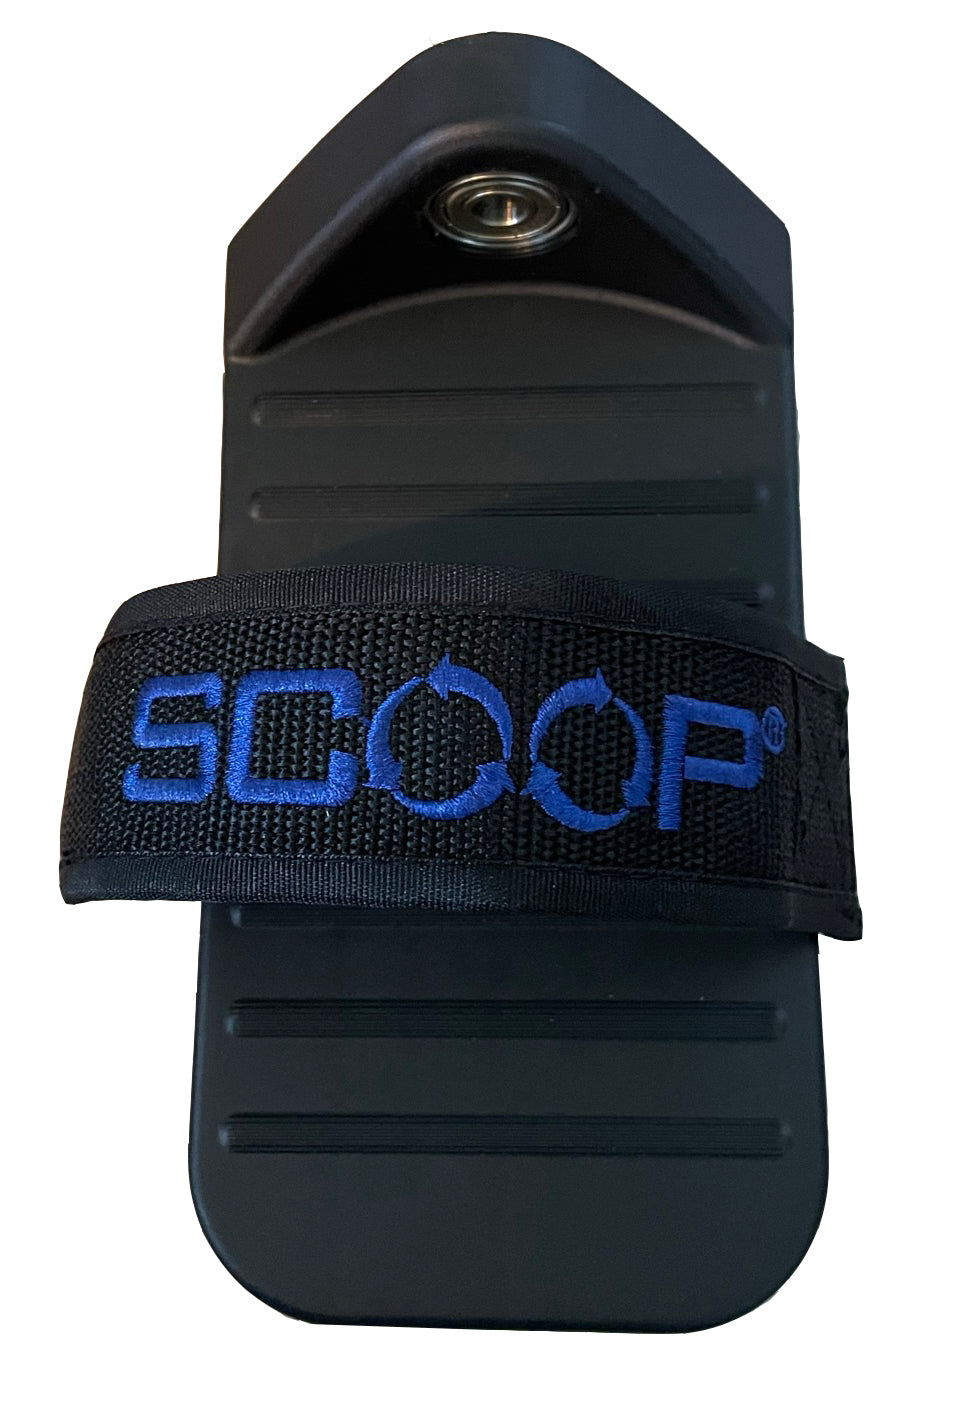 Pedal Upgrade for Scoop®:  One Pair Standard Sized Pedals with Adjustable Velcro